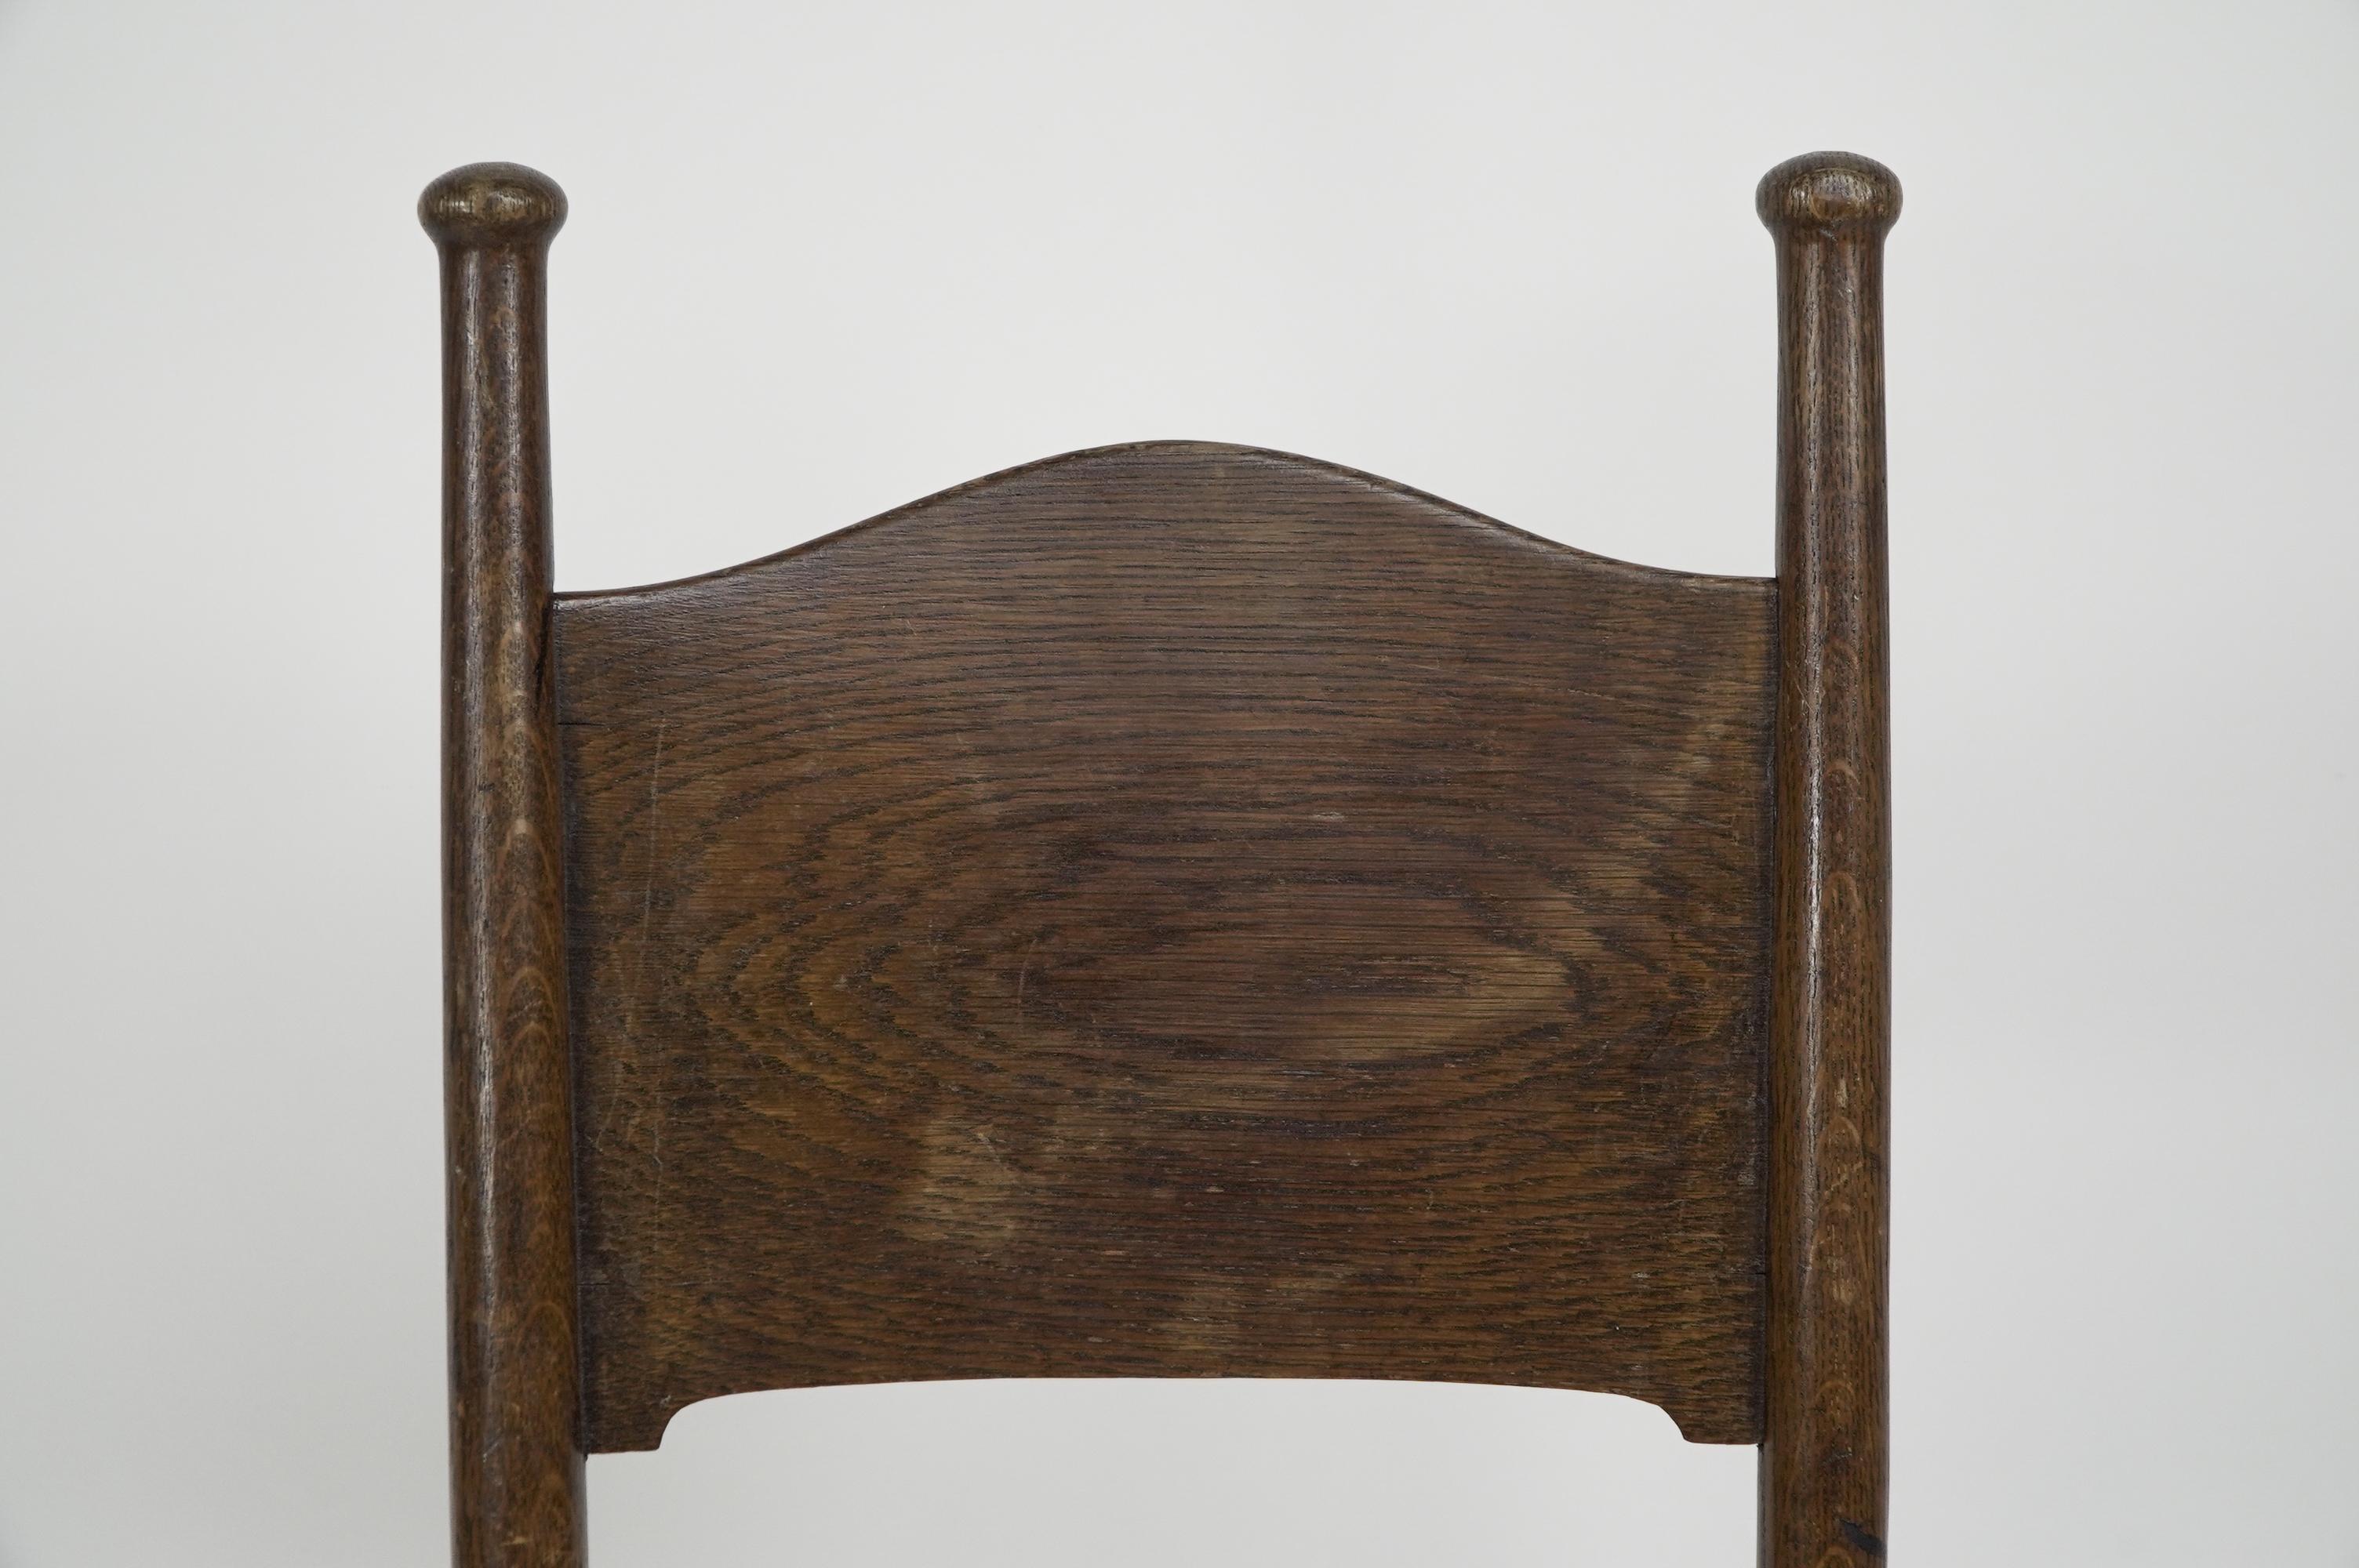 William Birch. An Arts and Crafts Oak upholstered chair For Sale 1